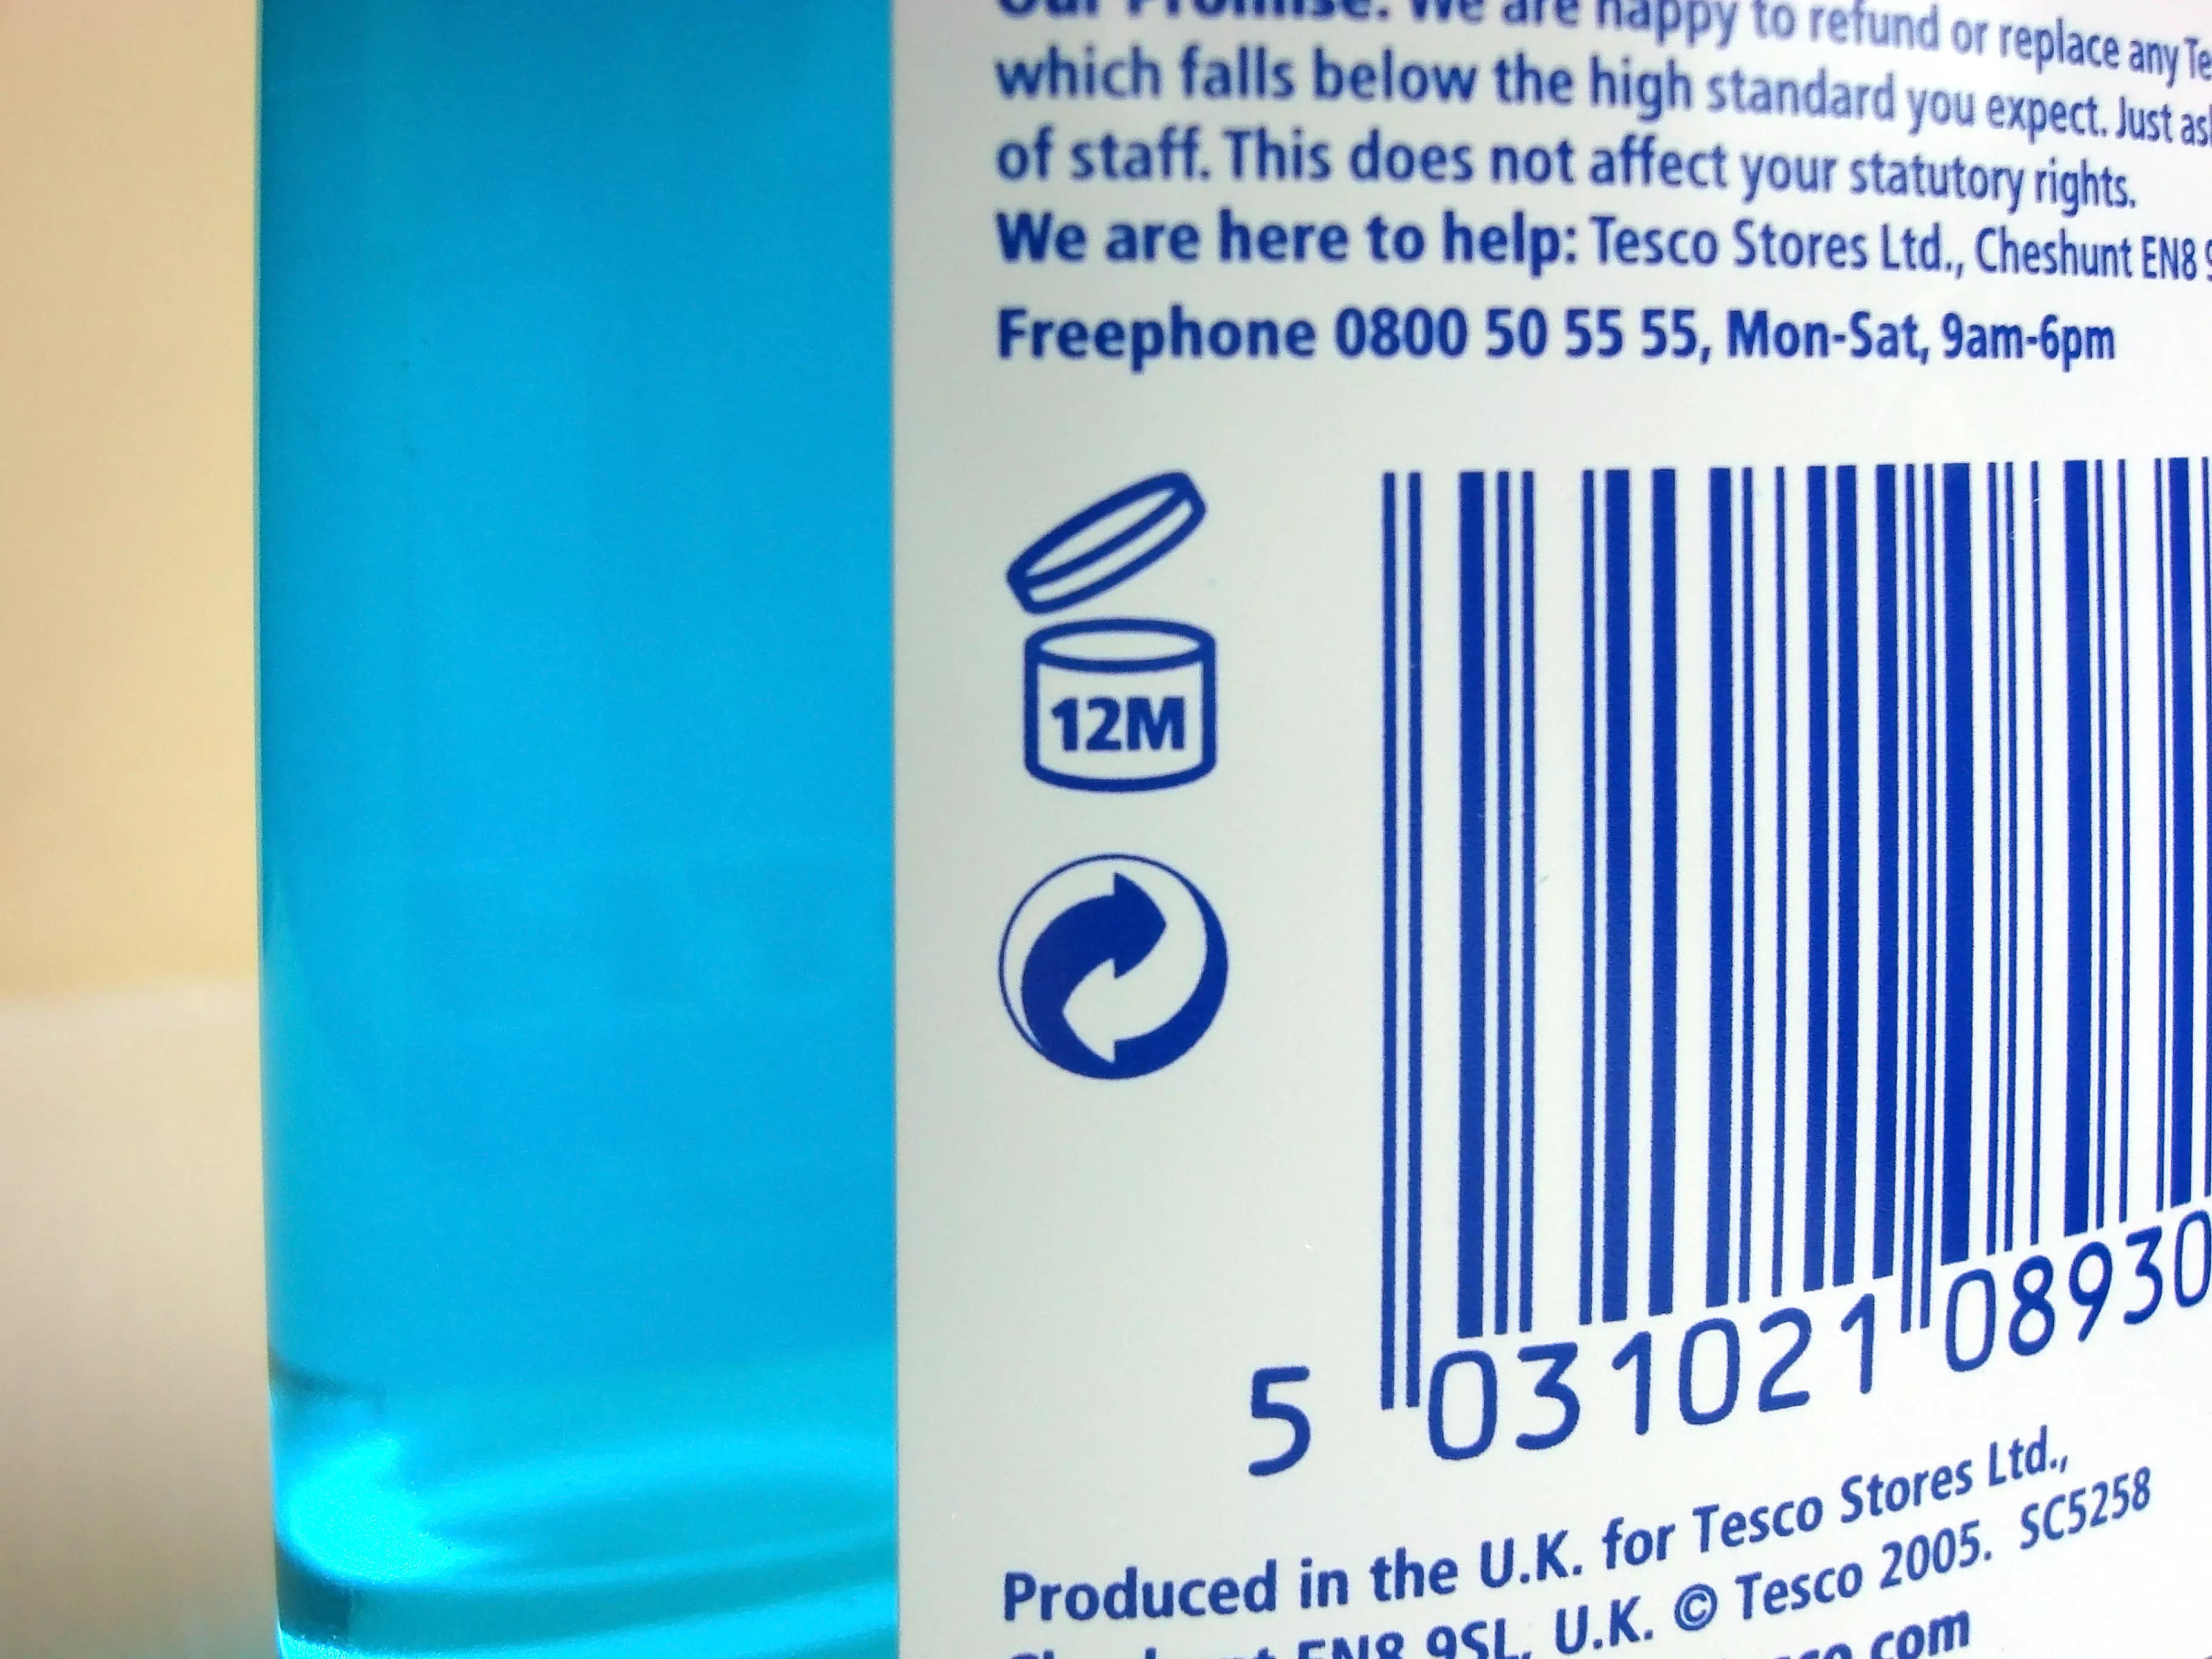 Make sure you're checking this symbol on the back of your products (